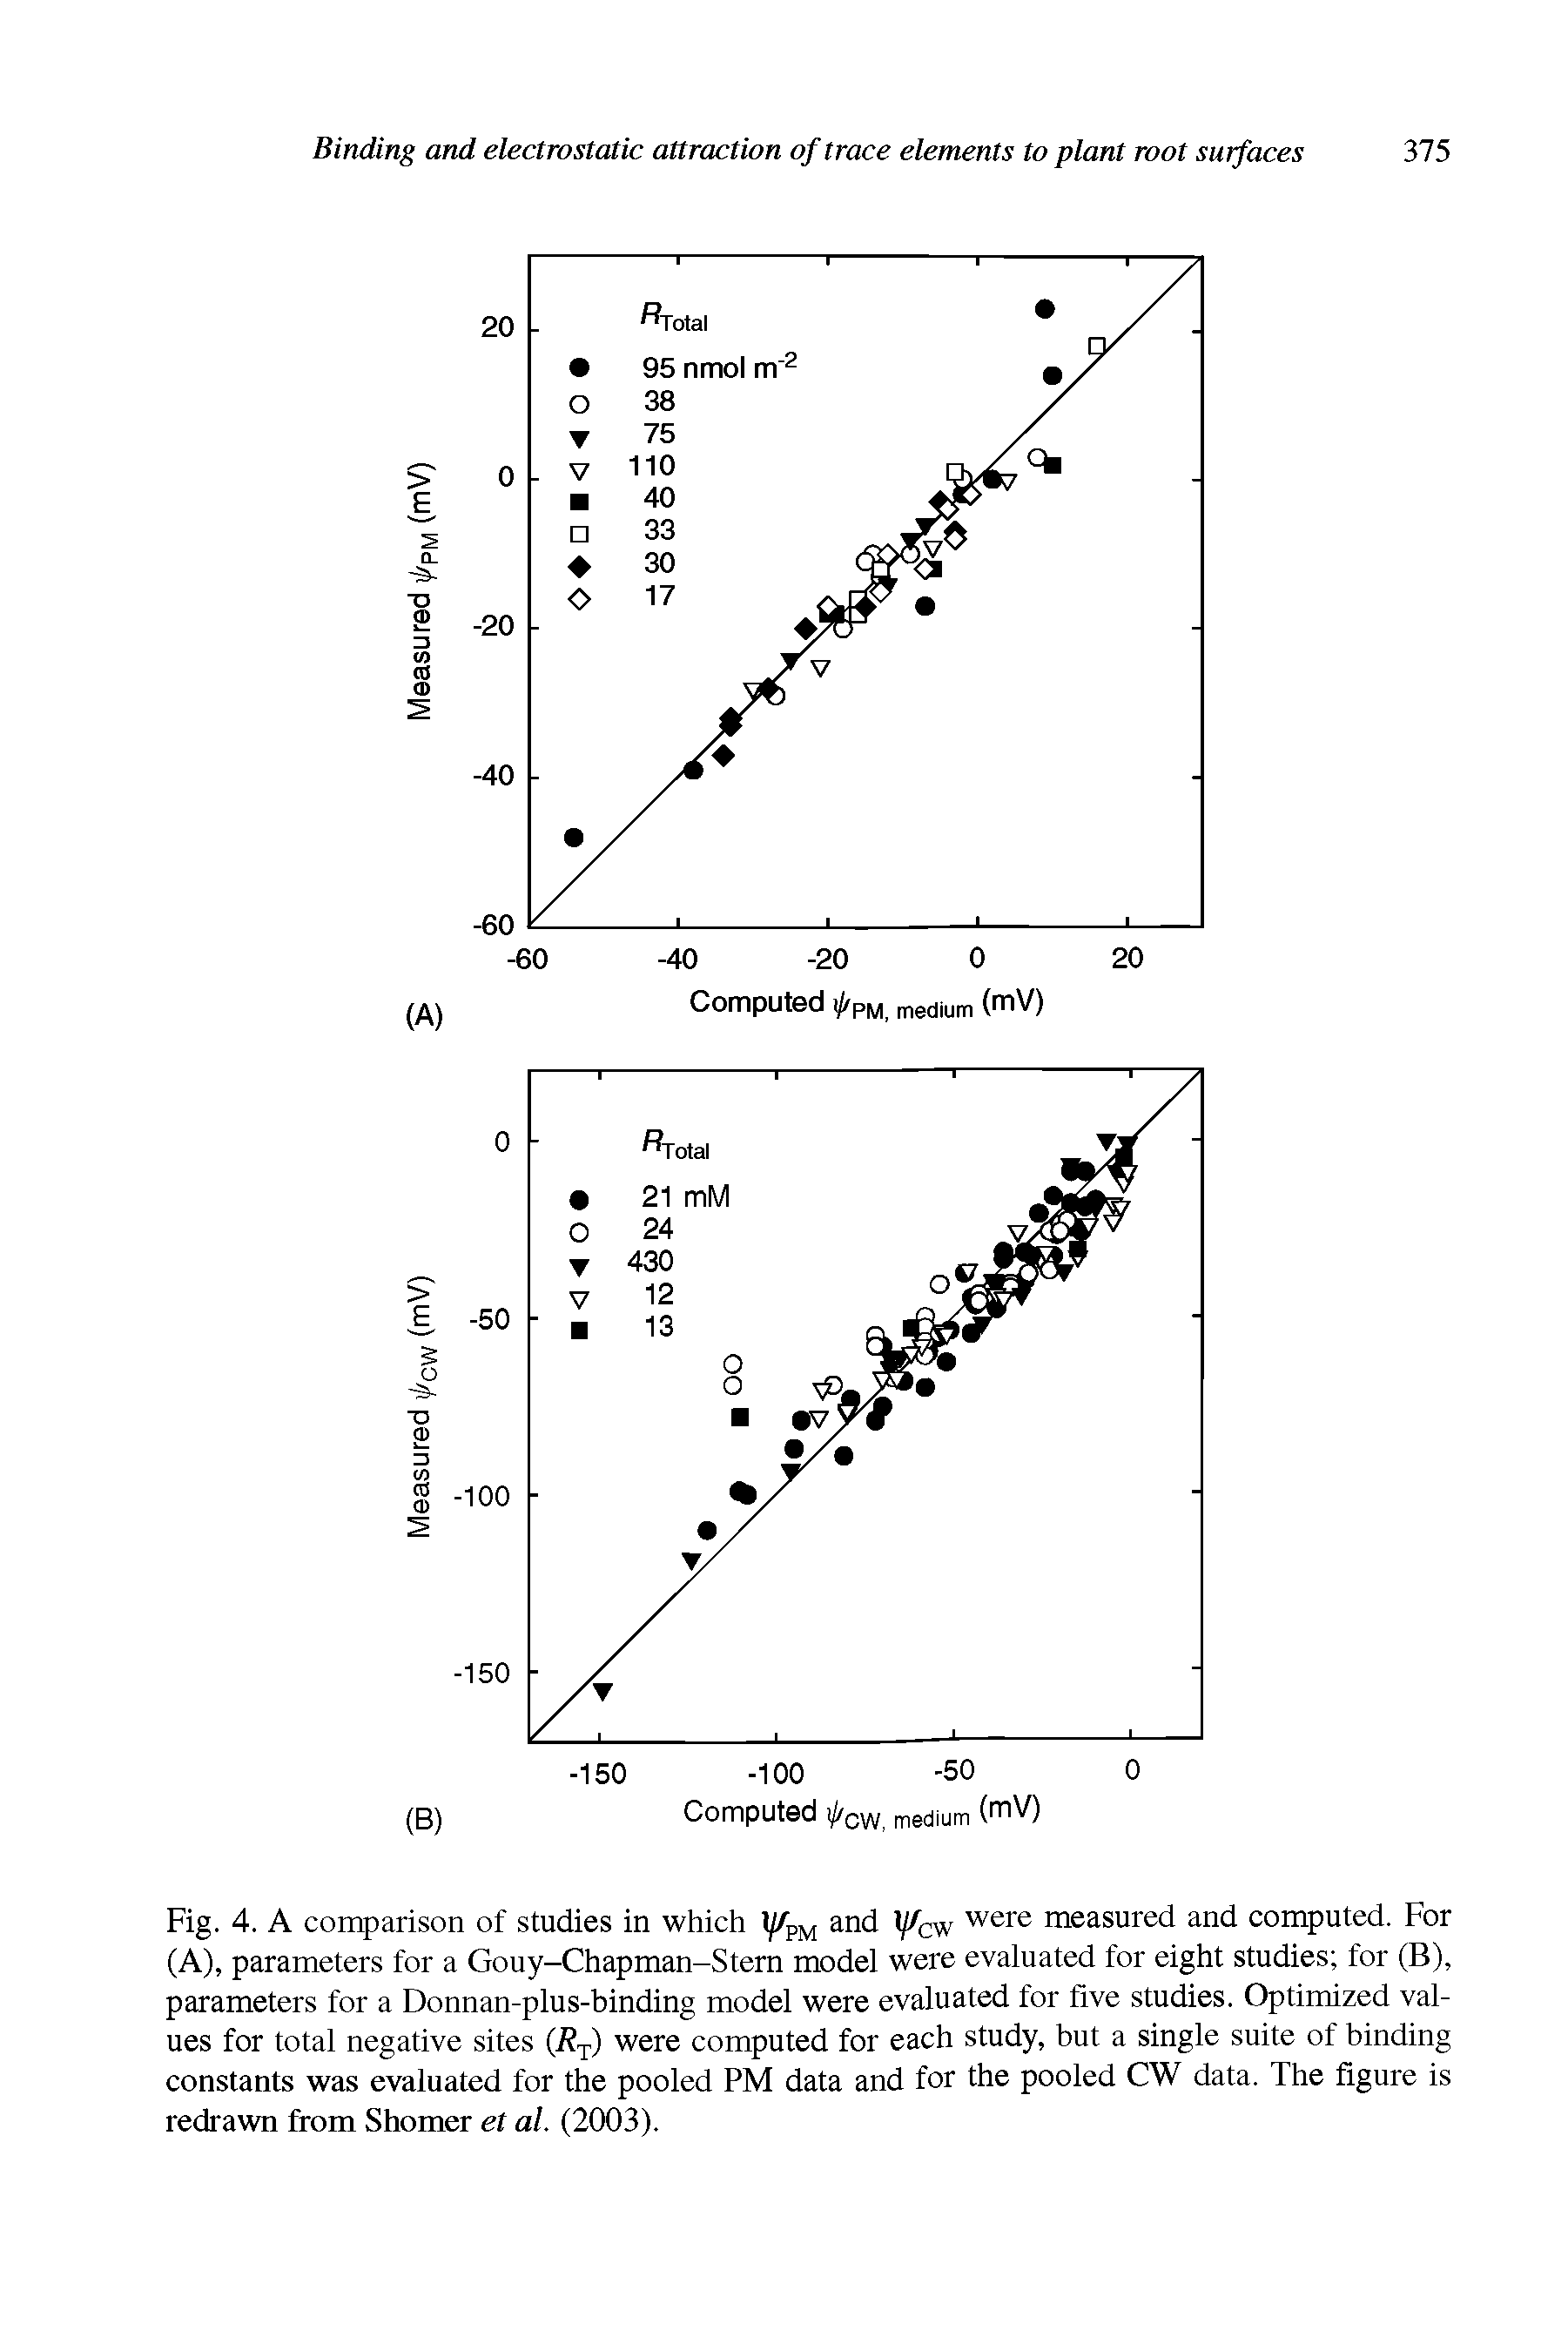 Fig. 4. A comparison of studies in which 1/Ap and y/cw were measured and computed. For (A), parameters for a Gouy-Chapman-Stern model were evaluated for eight studies for (B), parameters for a Donnan-plus-binding model were evaluated for five studies. Optimized values for total negative sites (Rj) were computed for each study, but a single suite of binding constants was evaluated for the pooled PM data and for the pooled CW data. The figure is redrawn from Shomer et al. (2003).